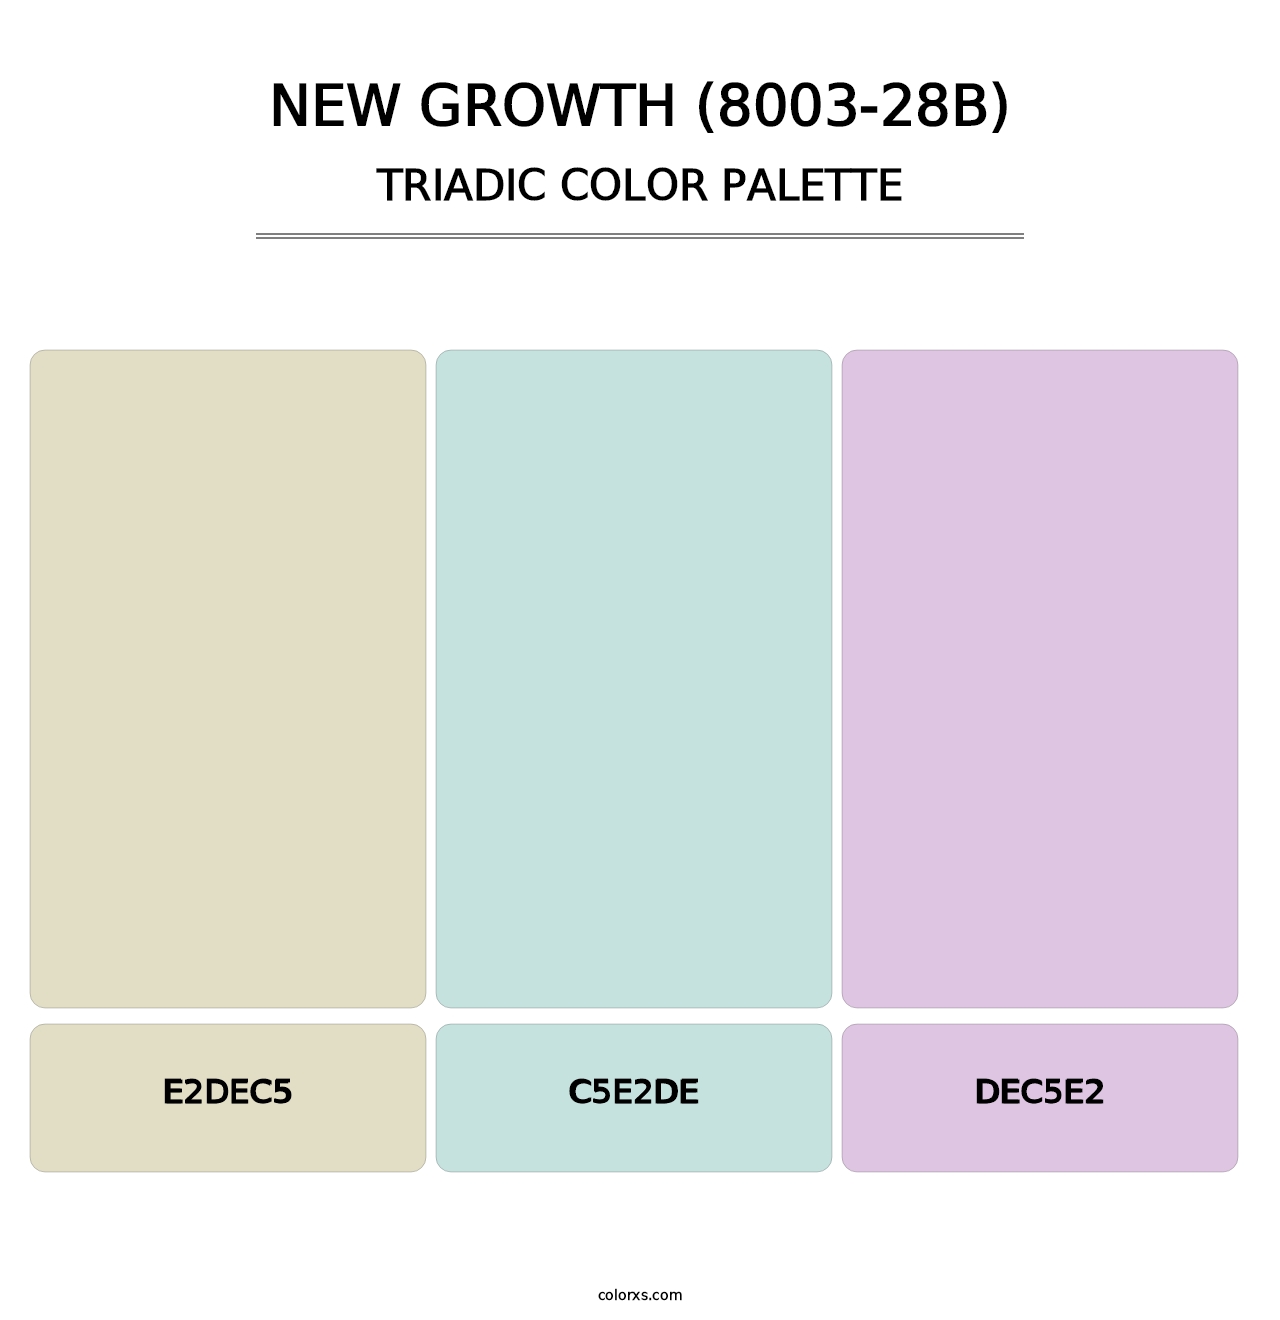 New Growth (8003-28B) - Triadic Color Palette